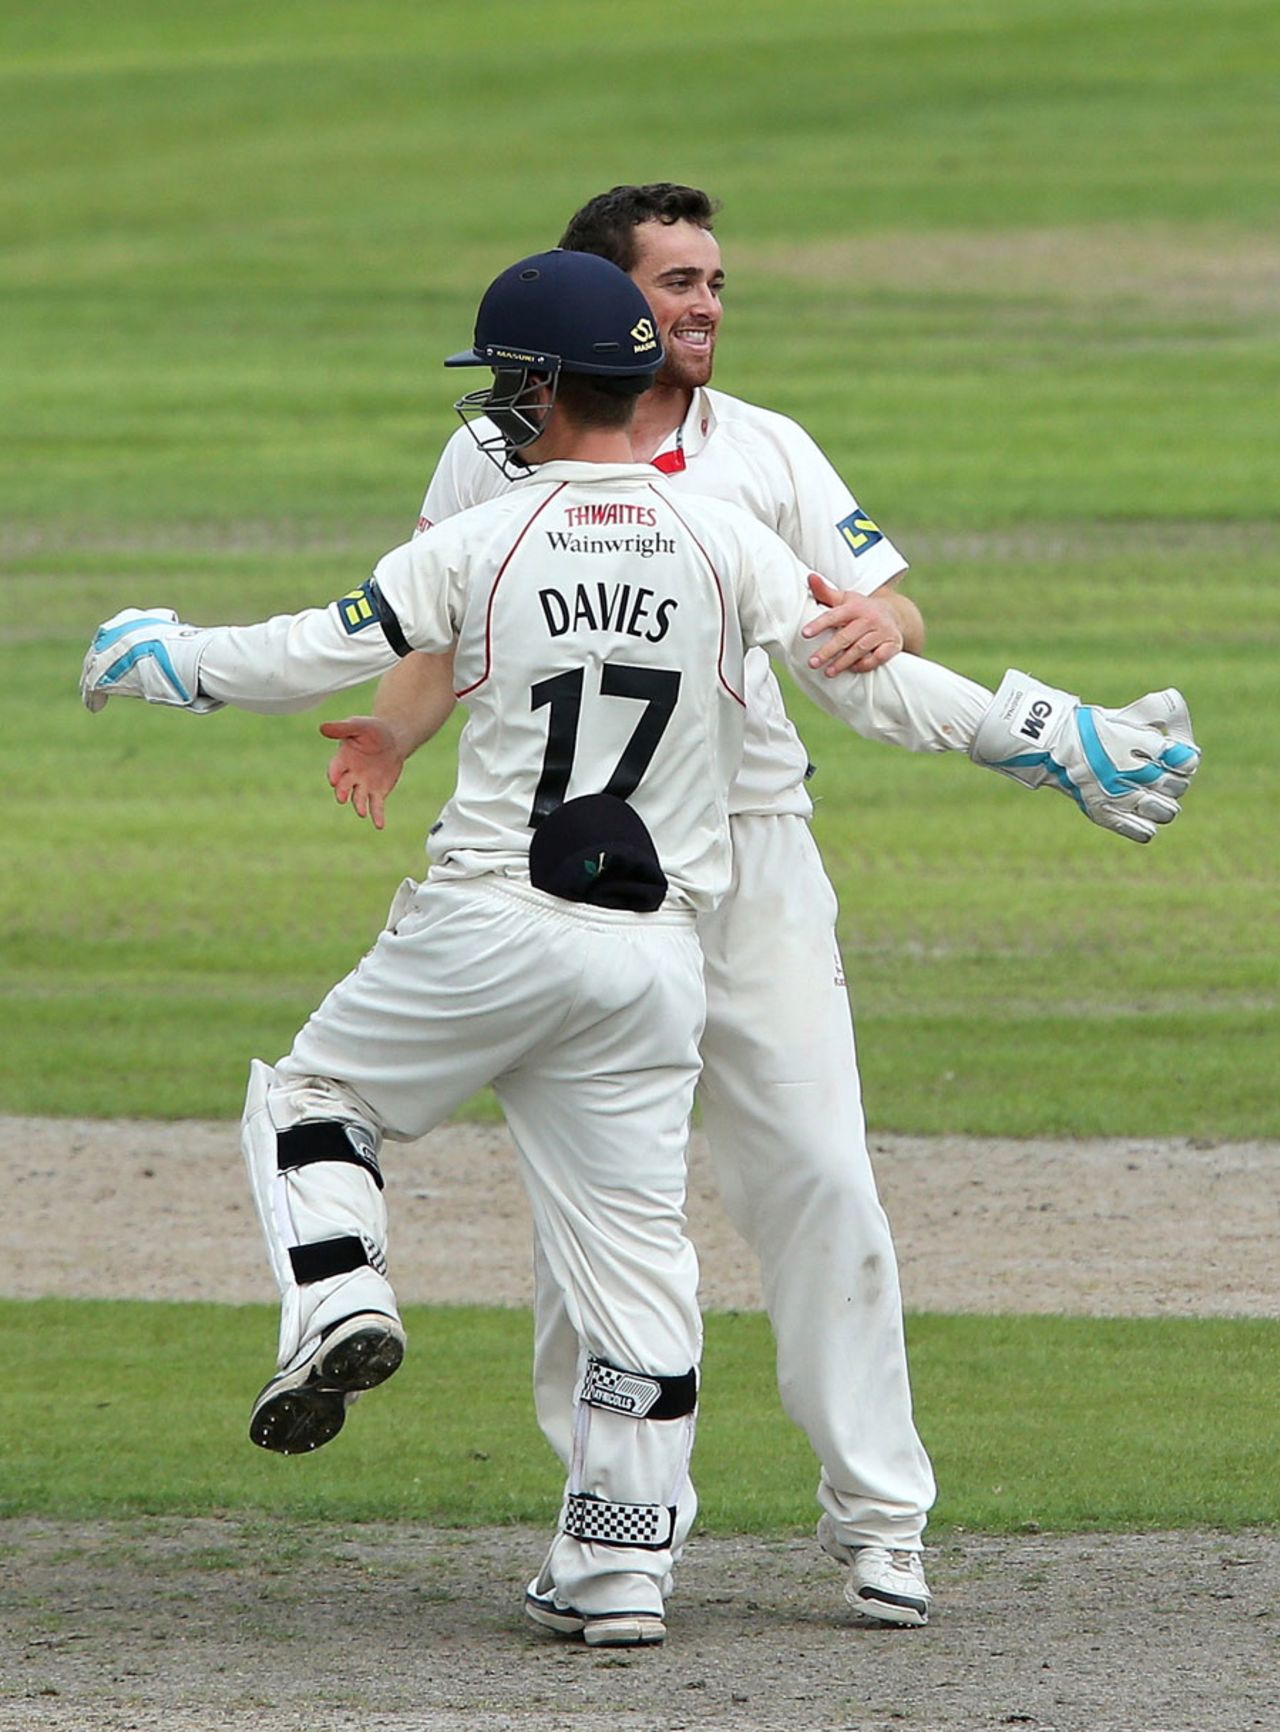 Stephen Parry celebrates a wicket with keeper Alex Davies, Lancashire v Yorkshire, County Championship, Division One, Old Trafford, September 1, 2014